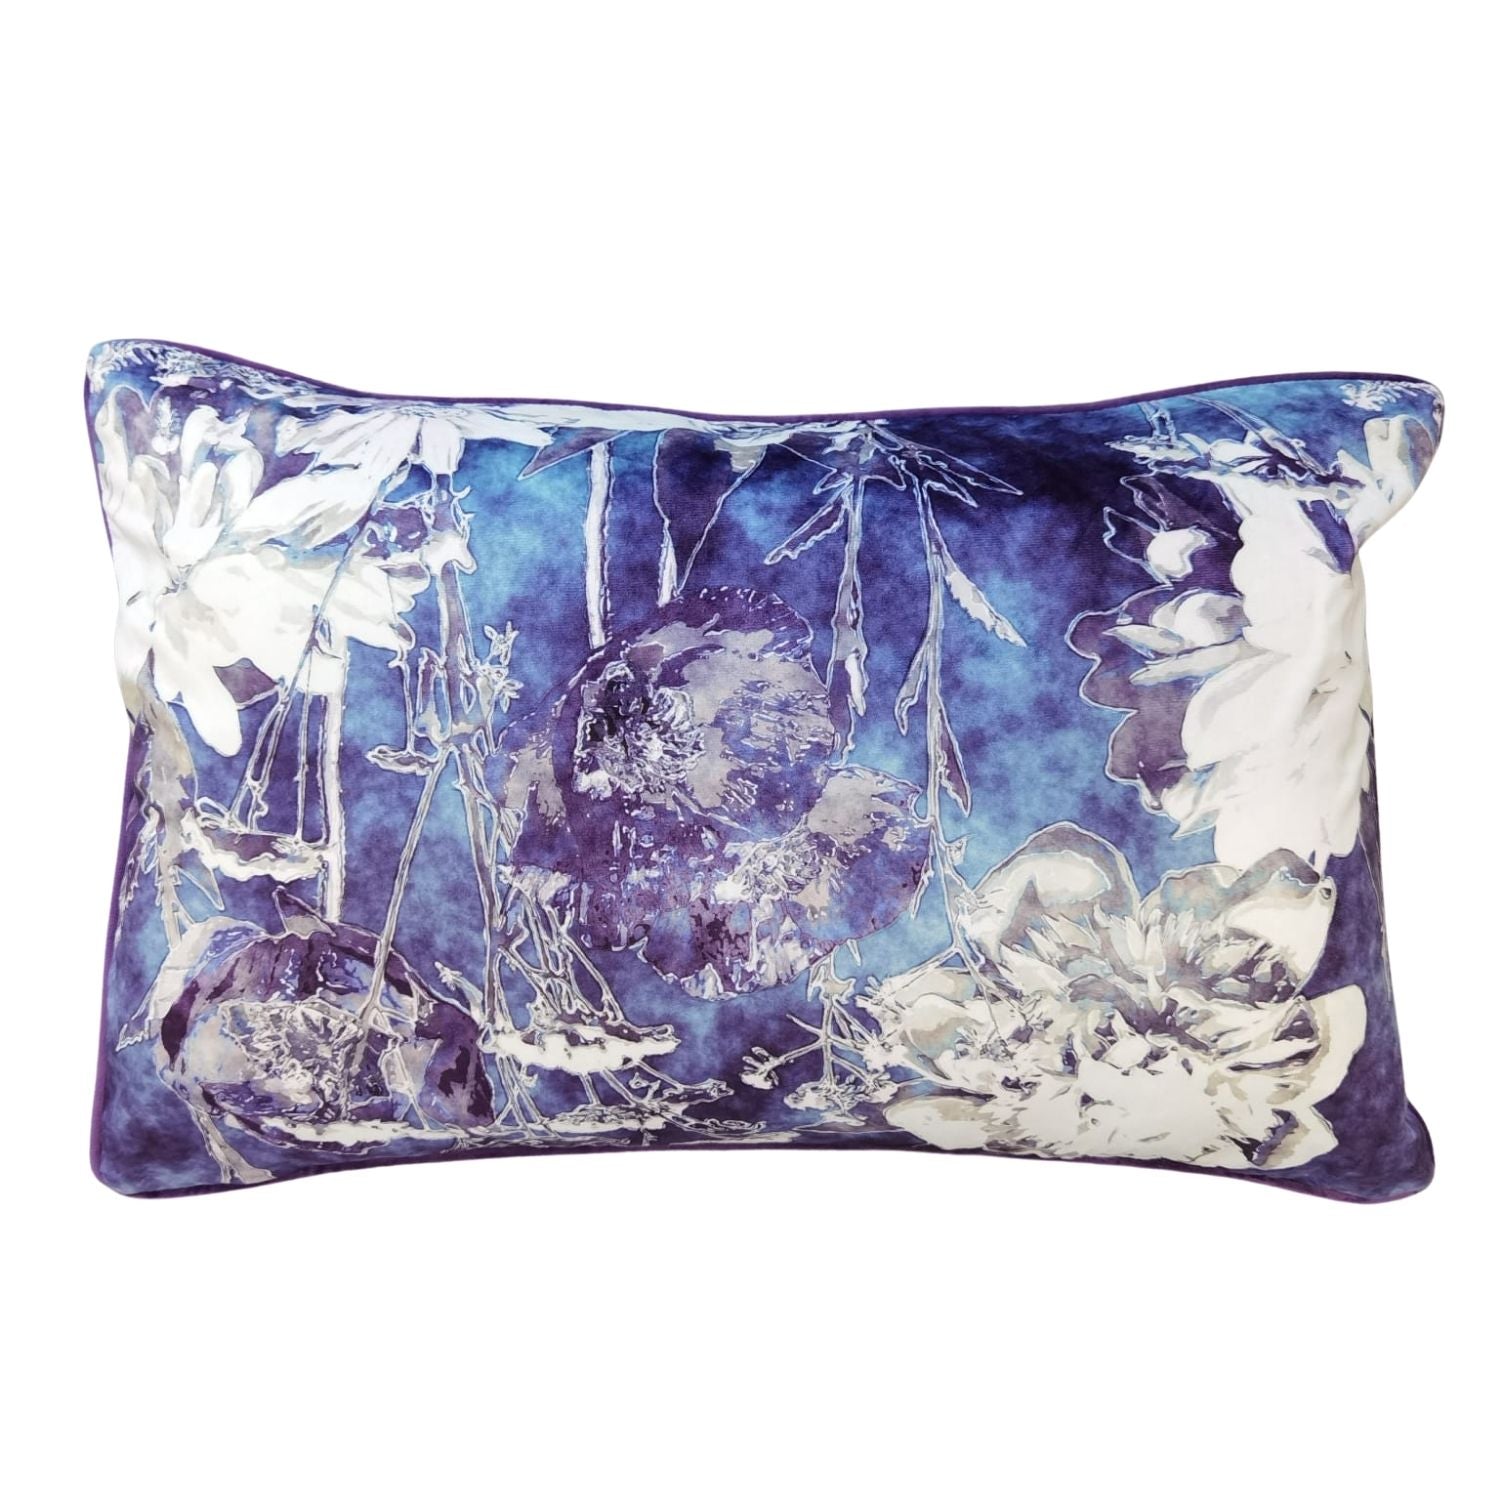 The Home Living Room Printed Piped Cushion - Purple 1 Shaws Department Stores